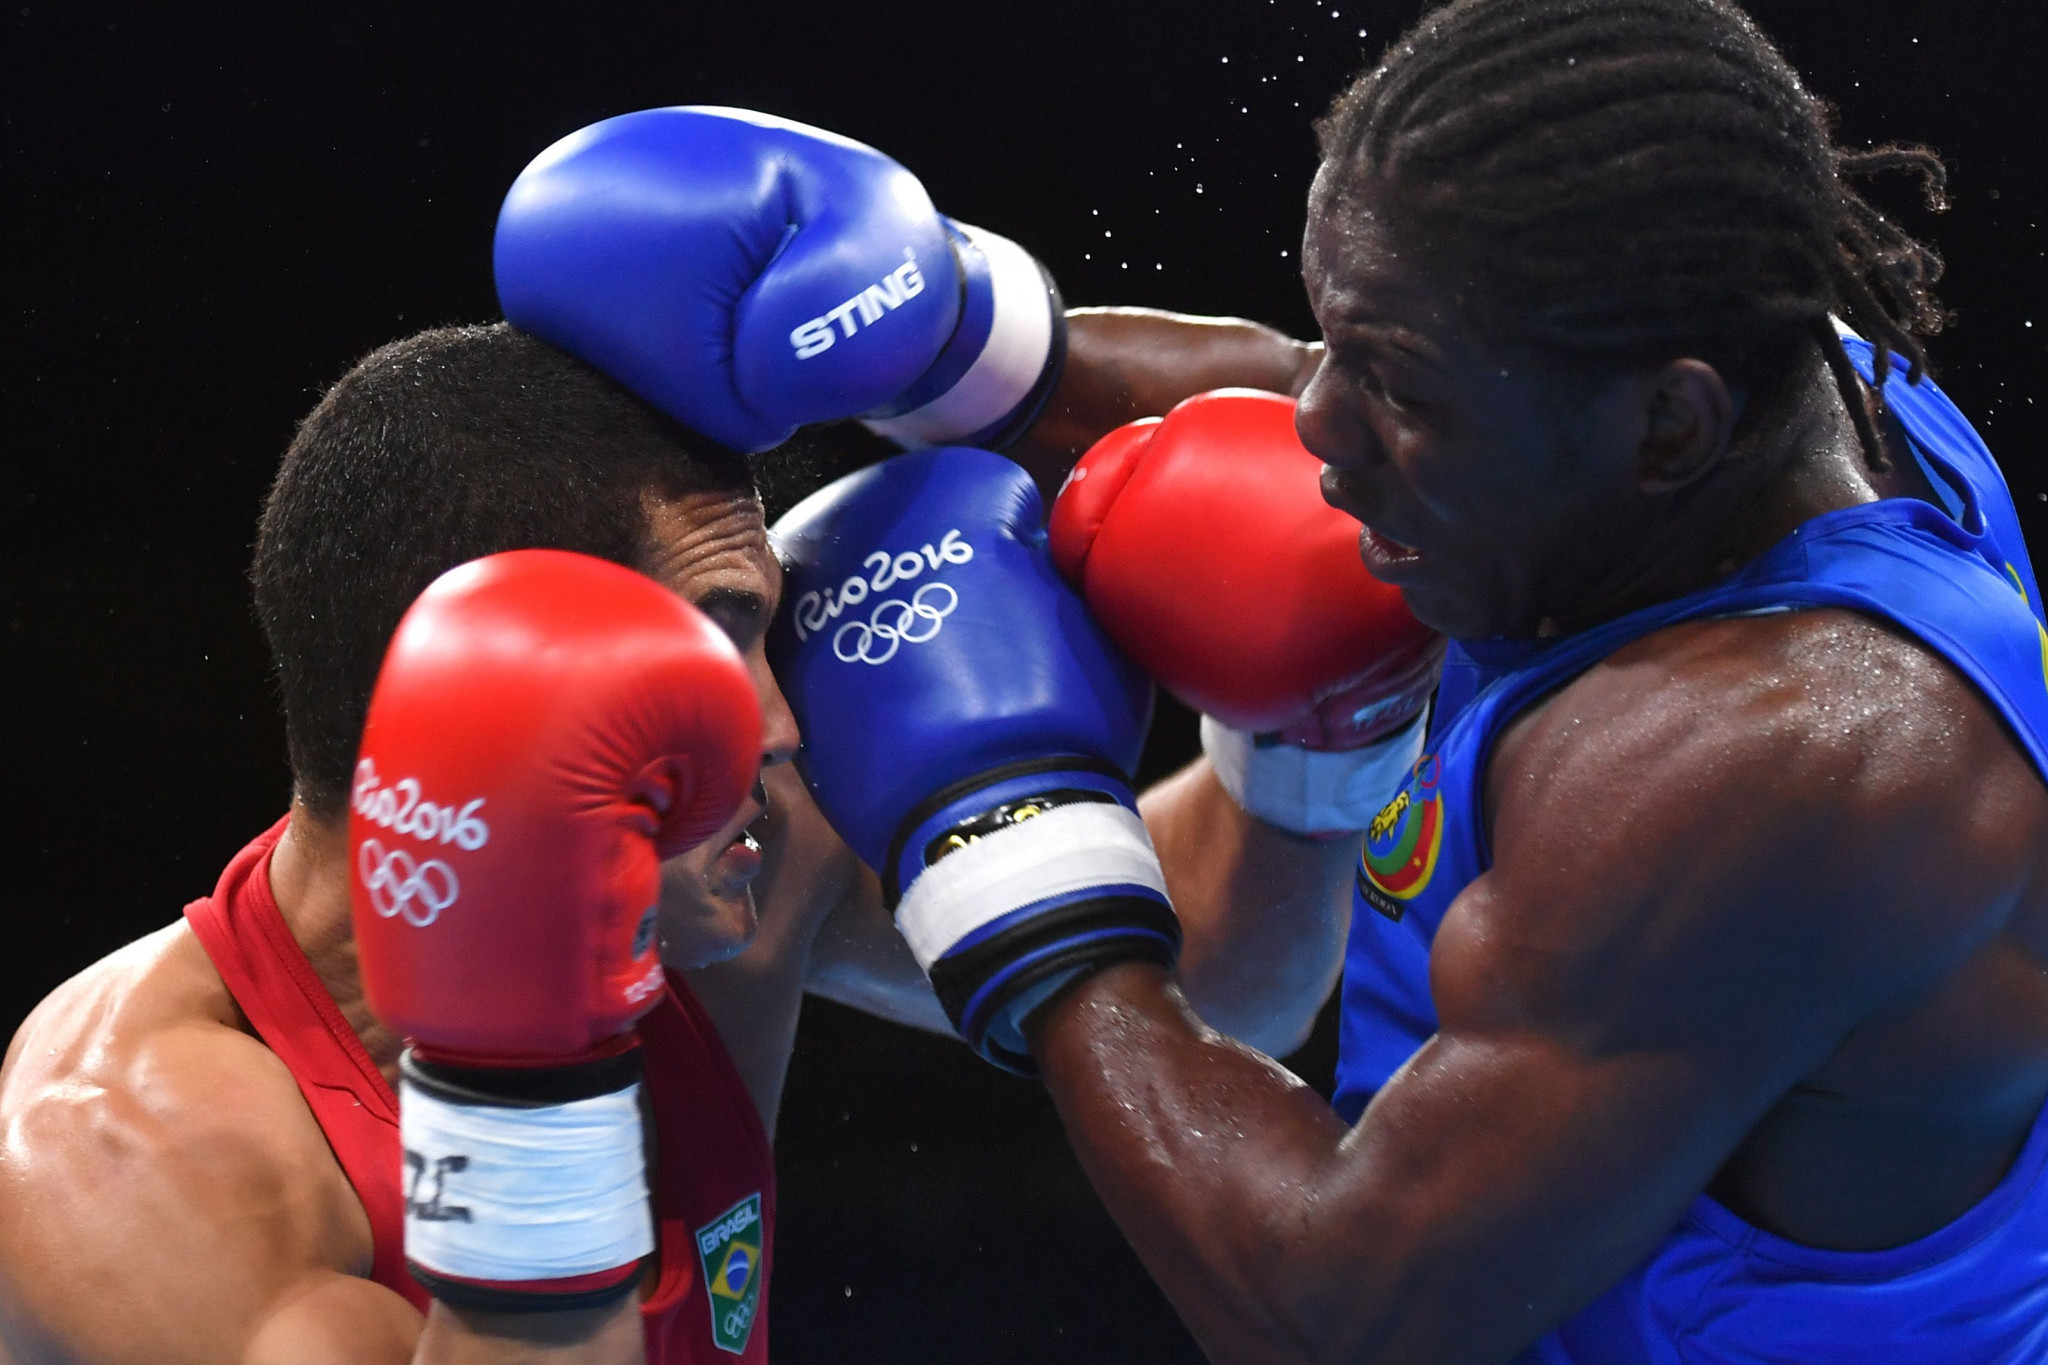 Cameroon's Hassan N'Dam, in blue, was one of three professional boxers to compete at Rio 2016 but he was beaten in the opening bout by Brazil's Michel Borges in the 81-kilograms category ©Getty Images